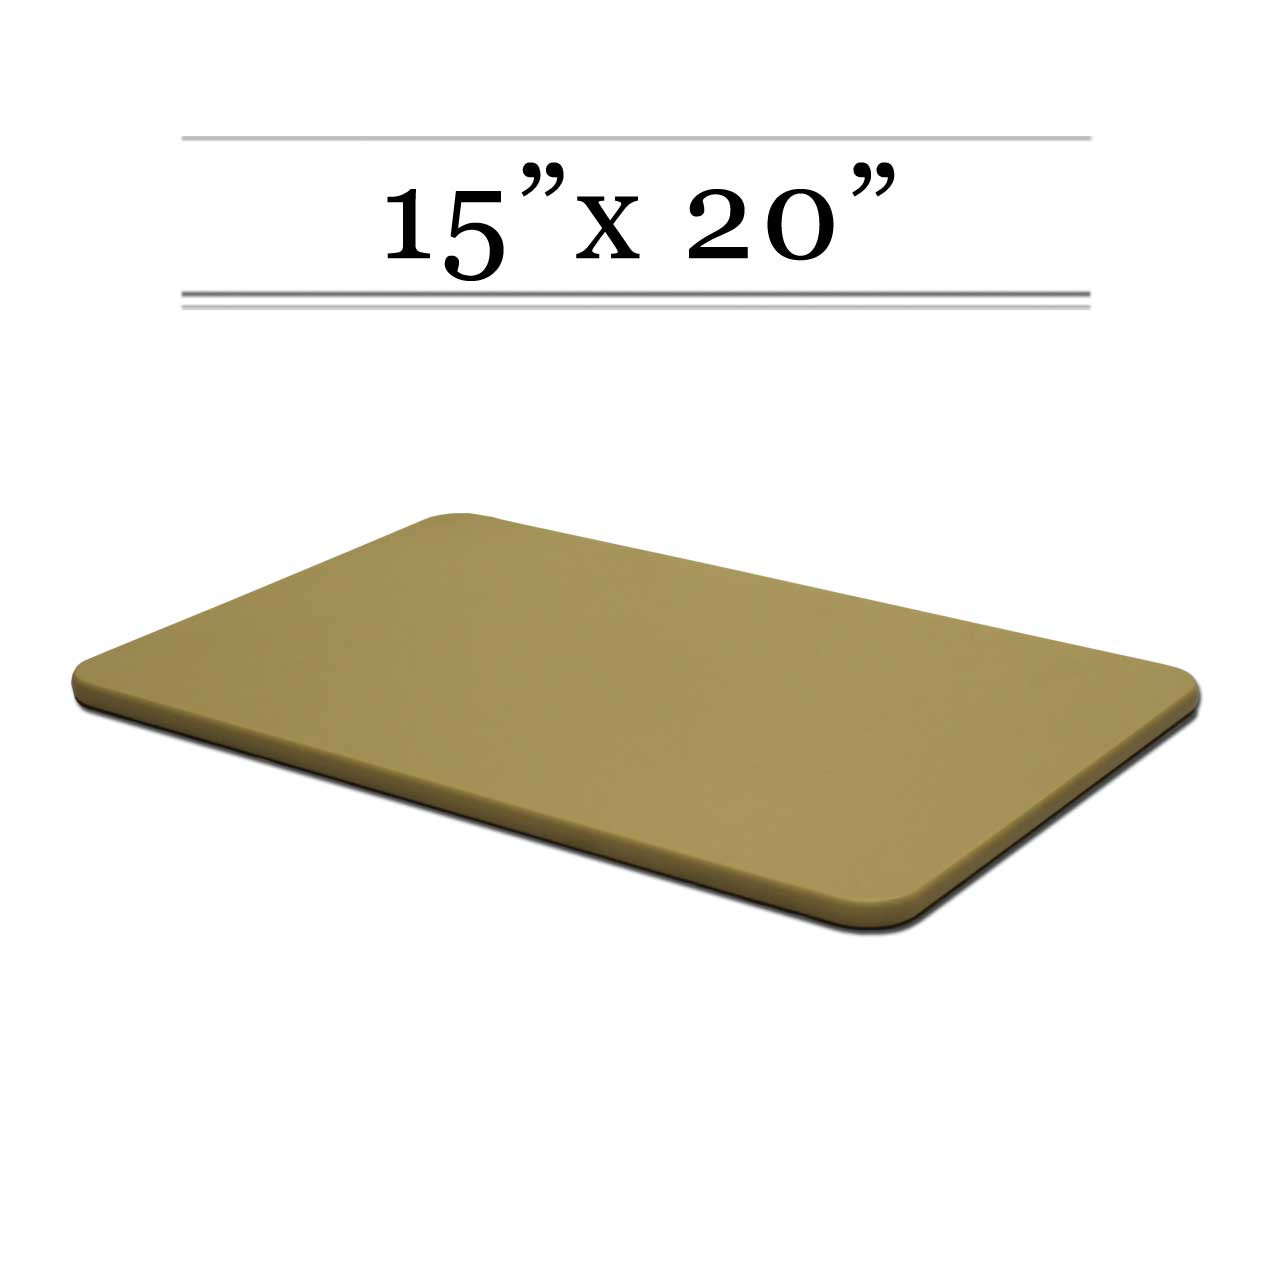  Plastic Cutting Board 15x20 3/4 Thick White, NSF Approved  Commercial Use: Home & Kitchen